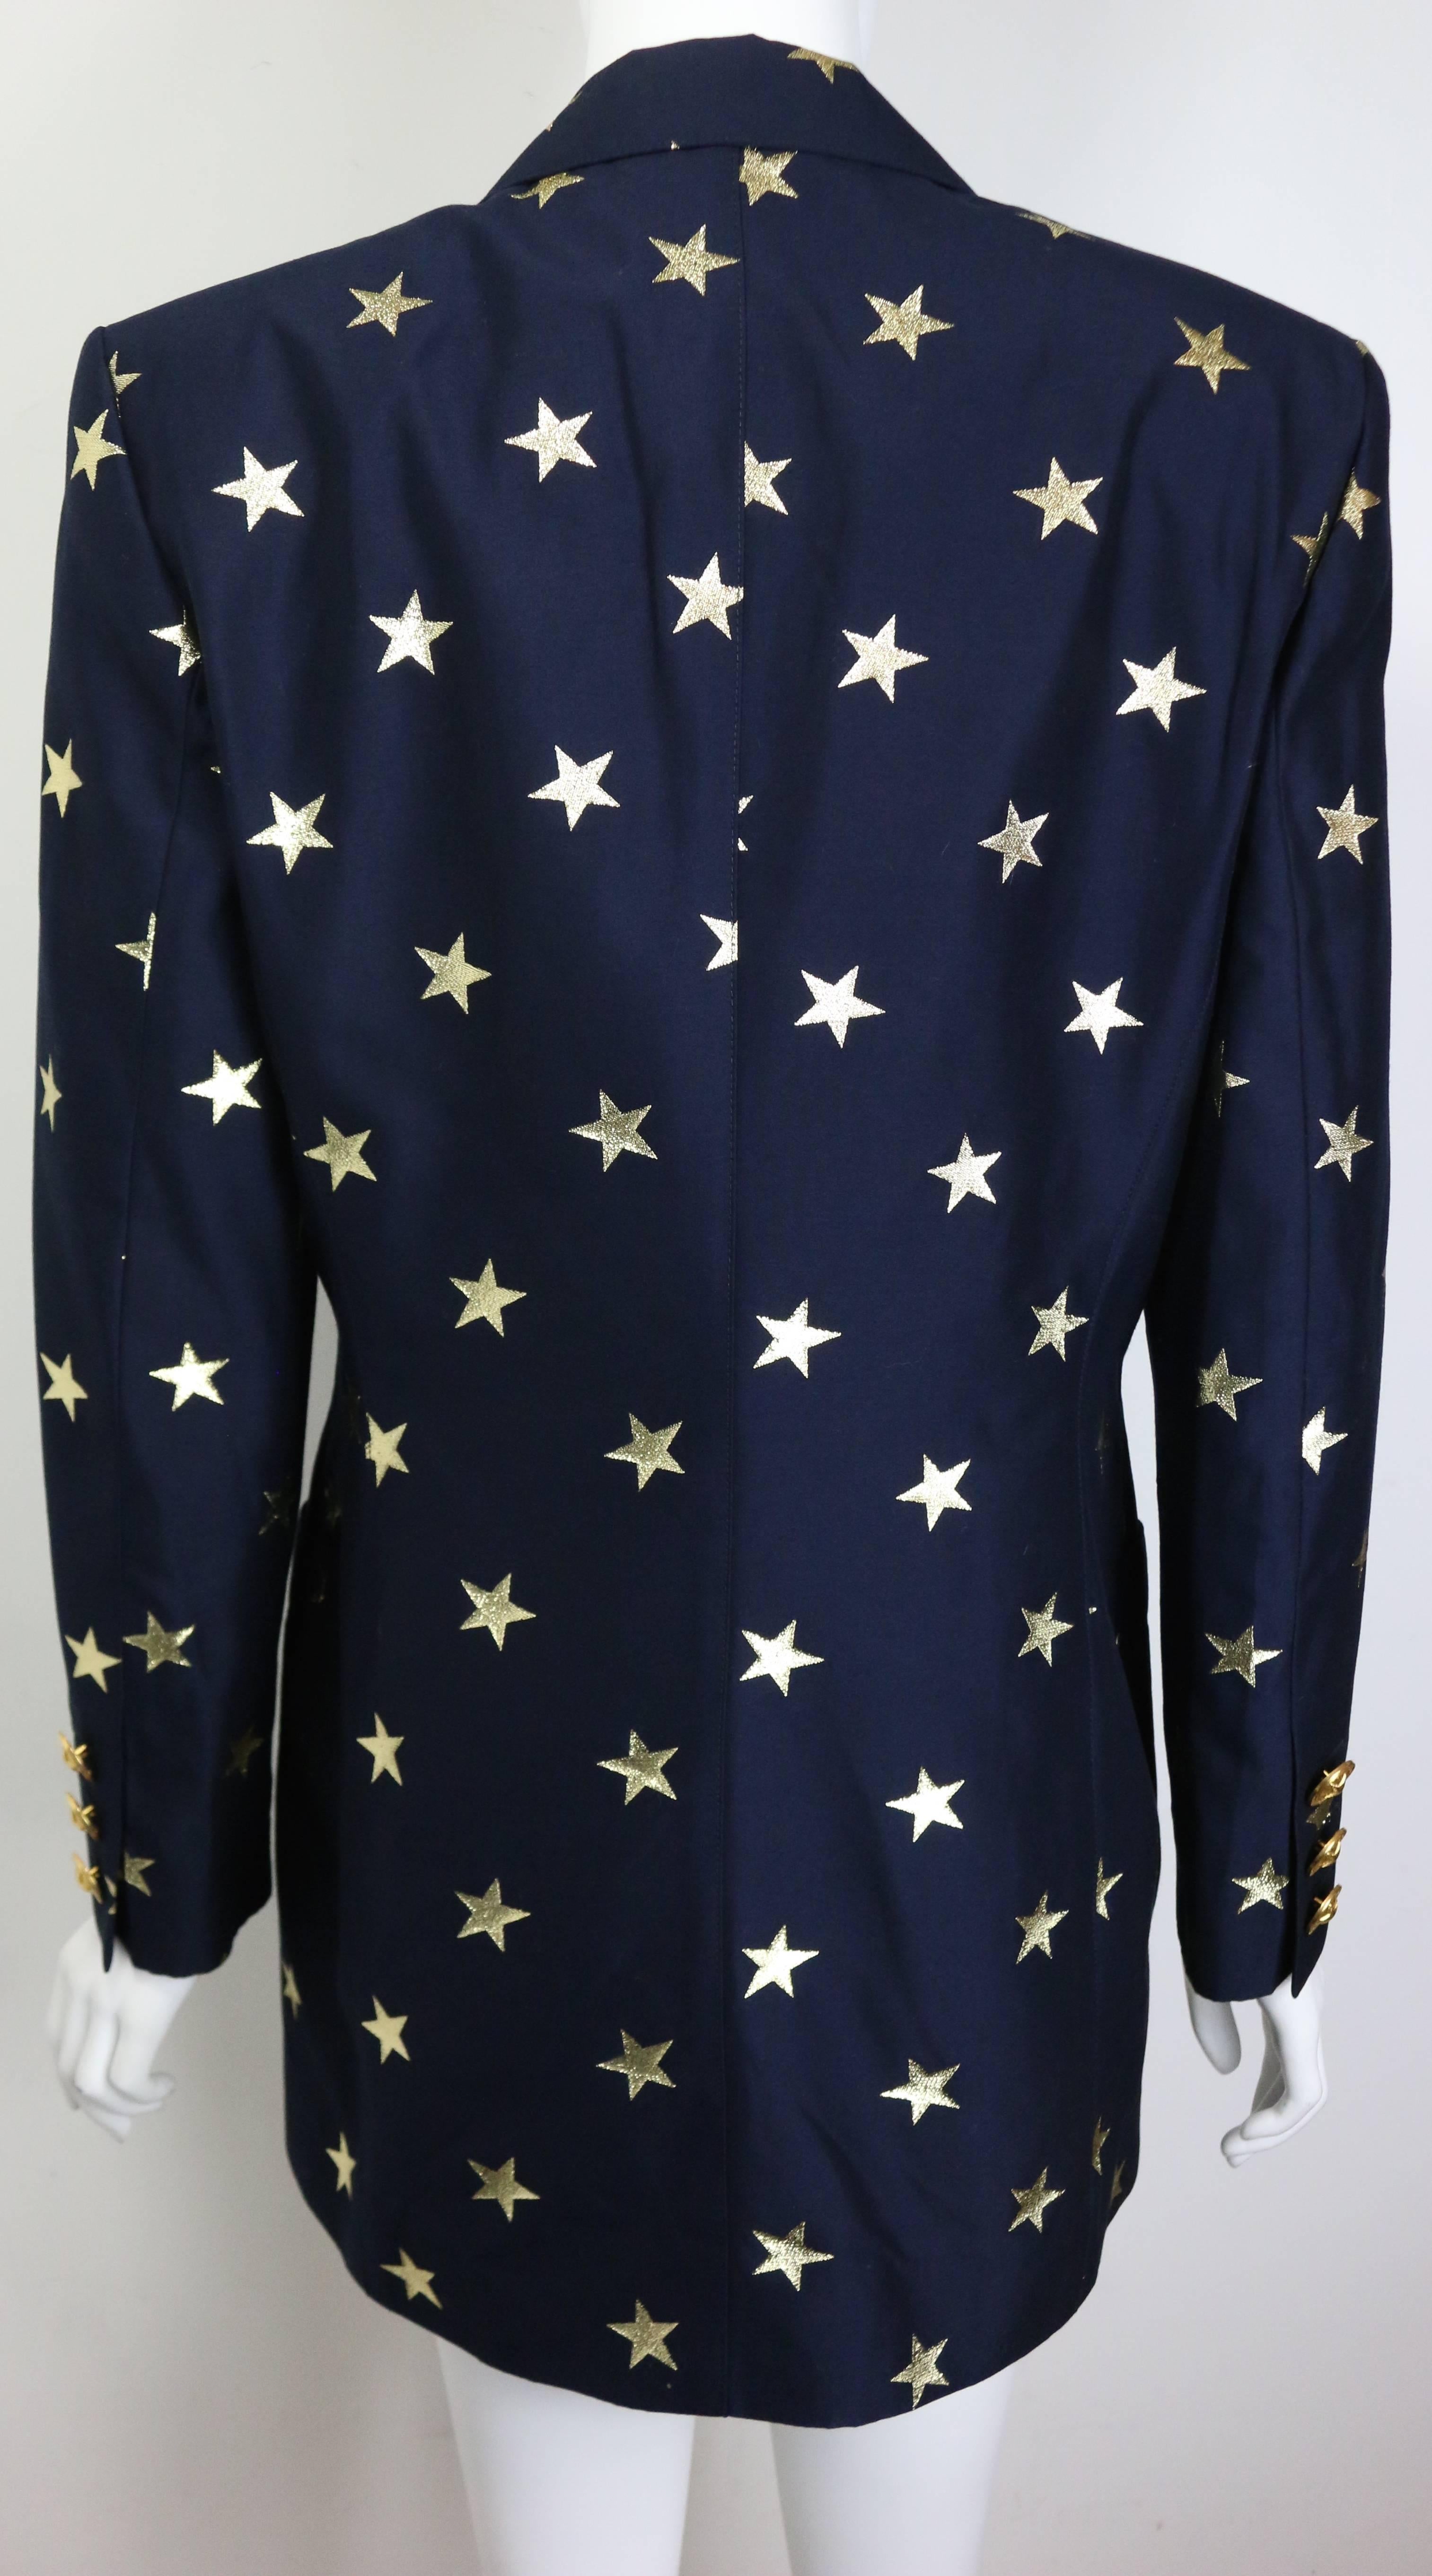 - Vintage 80s Escada navy with gold stars pattern double breasted blazer. This one of a kind blazer represent the glamours , big silhouette and the golden era of the stylish 80s!!!

- Featuring six front gold toned 